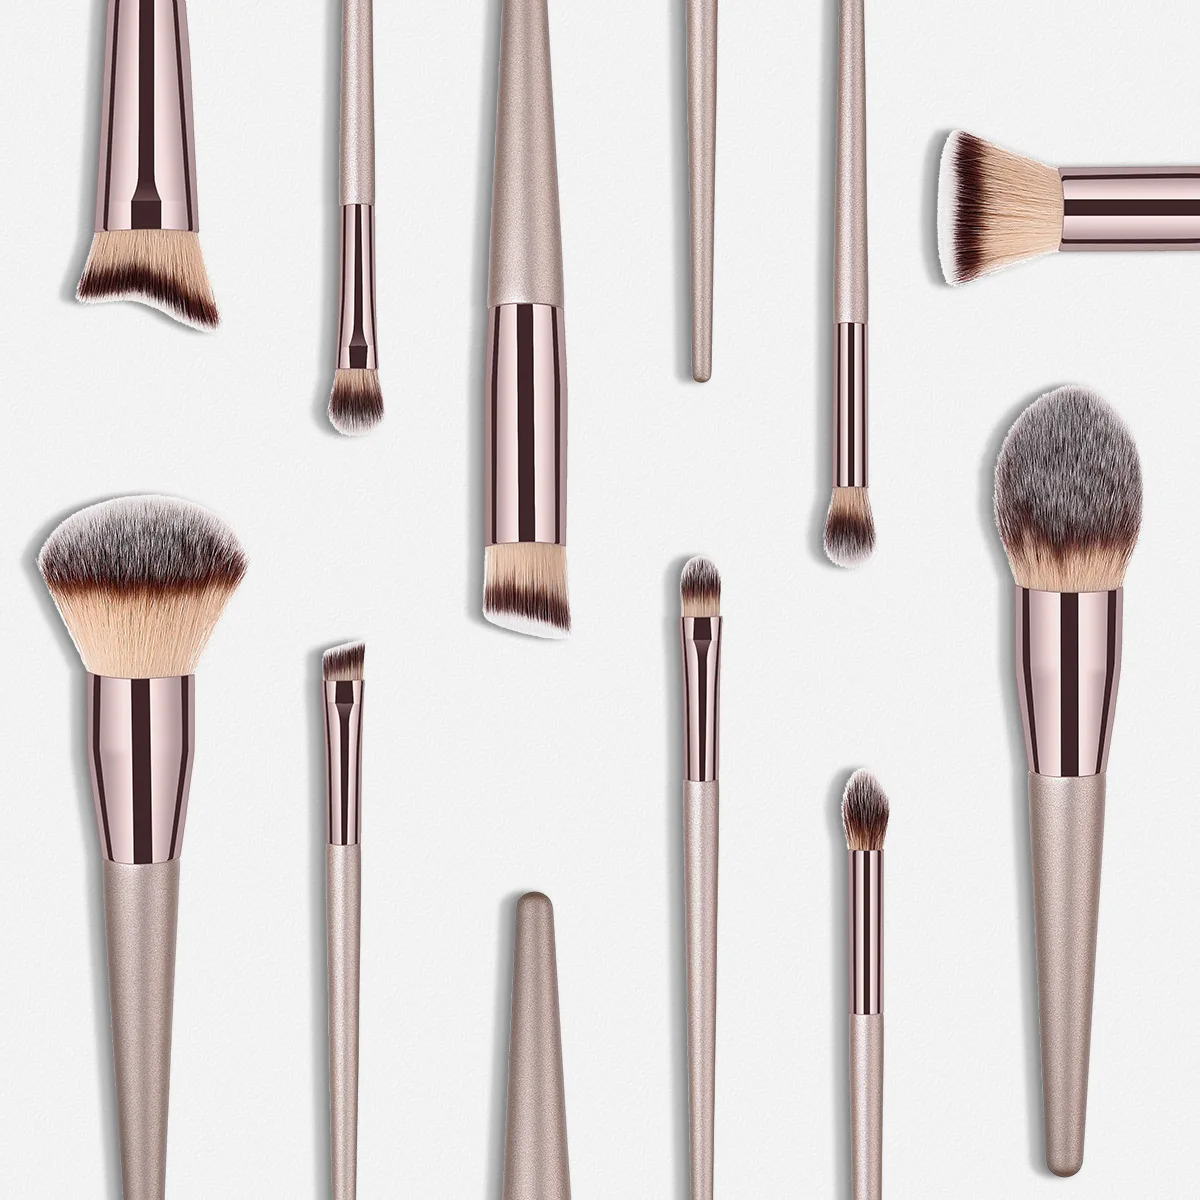 1PC New Fashion Champagne Makeup Brushes Wooden Foundation Cosmetic Eyebrow Eyeshadow Brush Makeup Brush Sets Tools Dropship